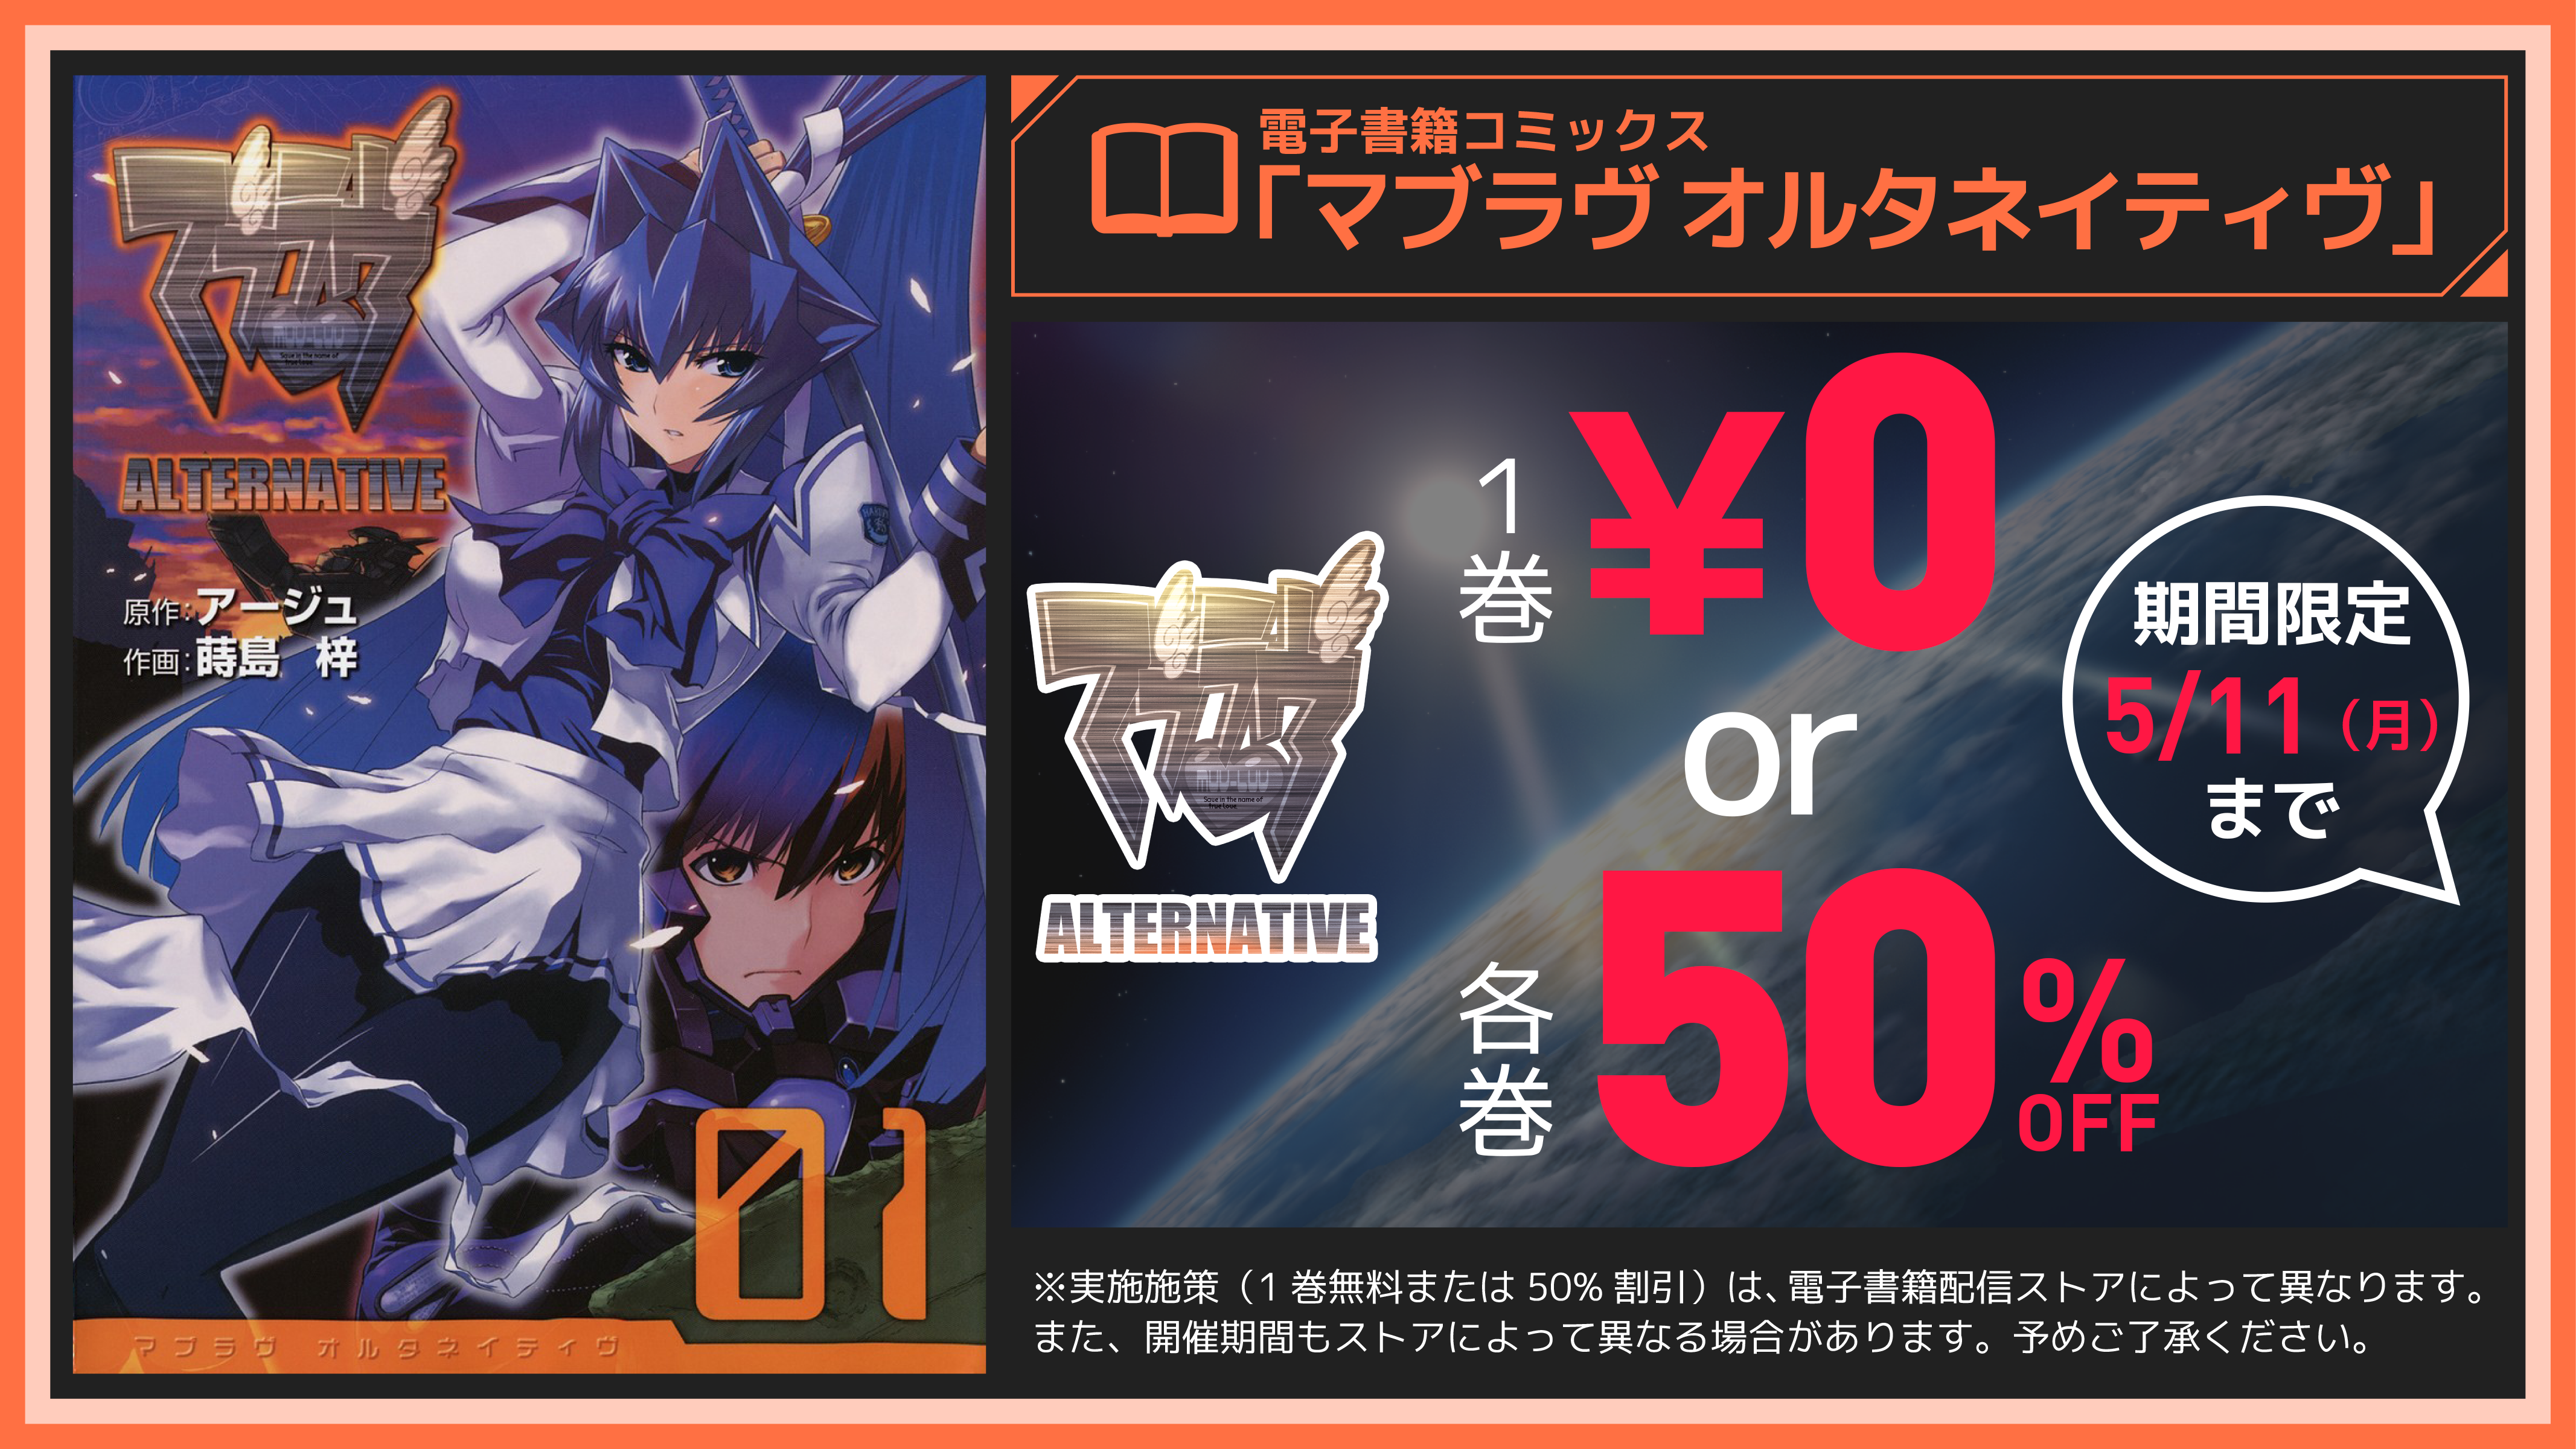 Get Volume 1 of the Japanese Muv-Luv Alternative Manga for free, or get the whole series for 50% off!